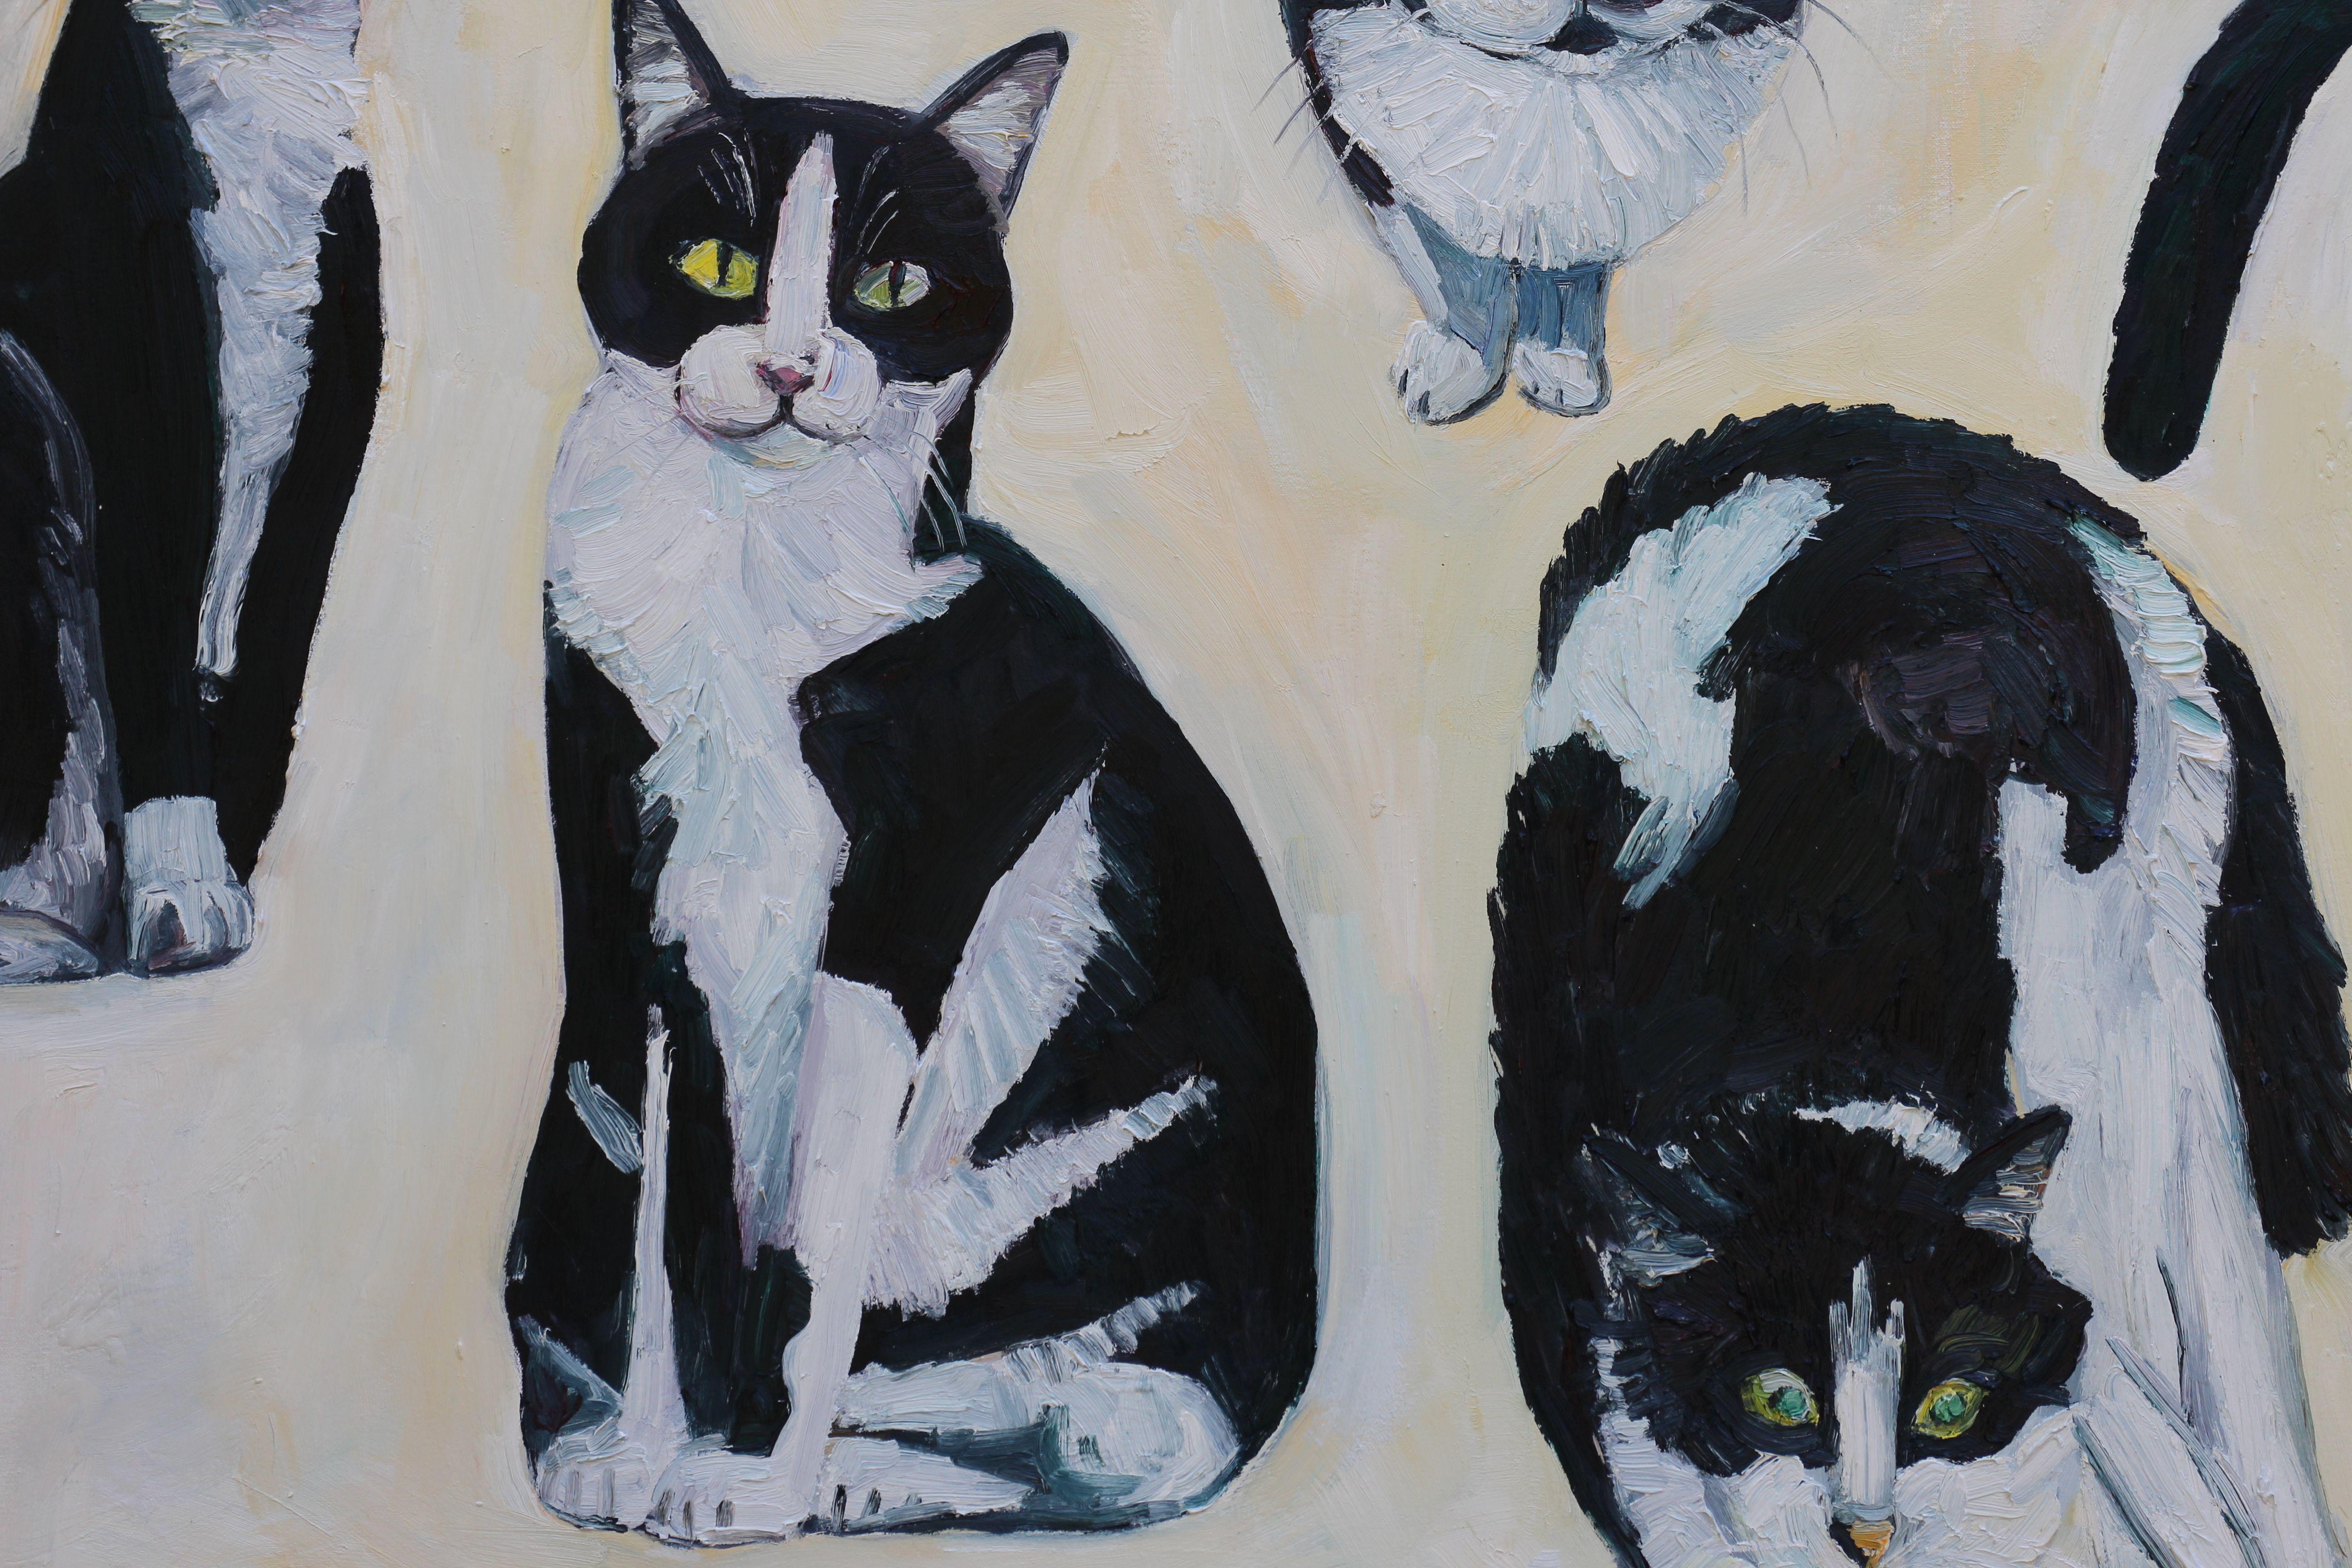 I did a Kickstarter project where I painted 100 cat portraits. The end result was to paint three large paintings where I would paint only orange cats on one of them and on the other two paintings, only black cats and cow cats. This is the one with